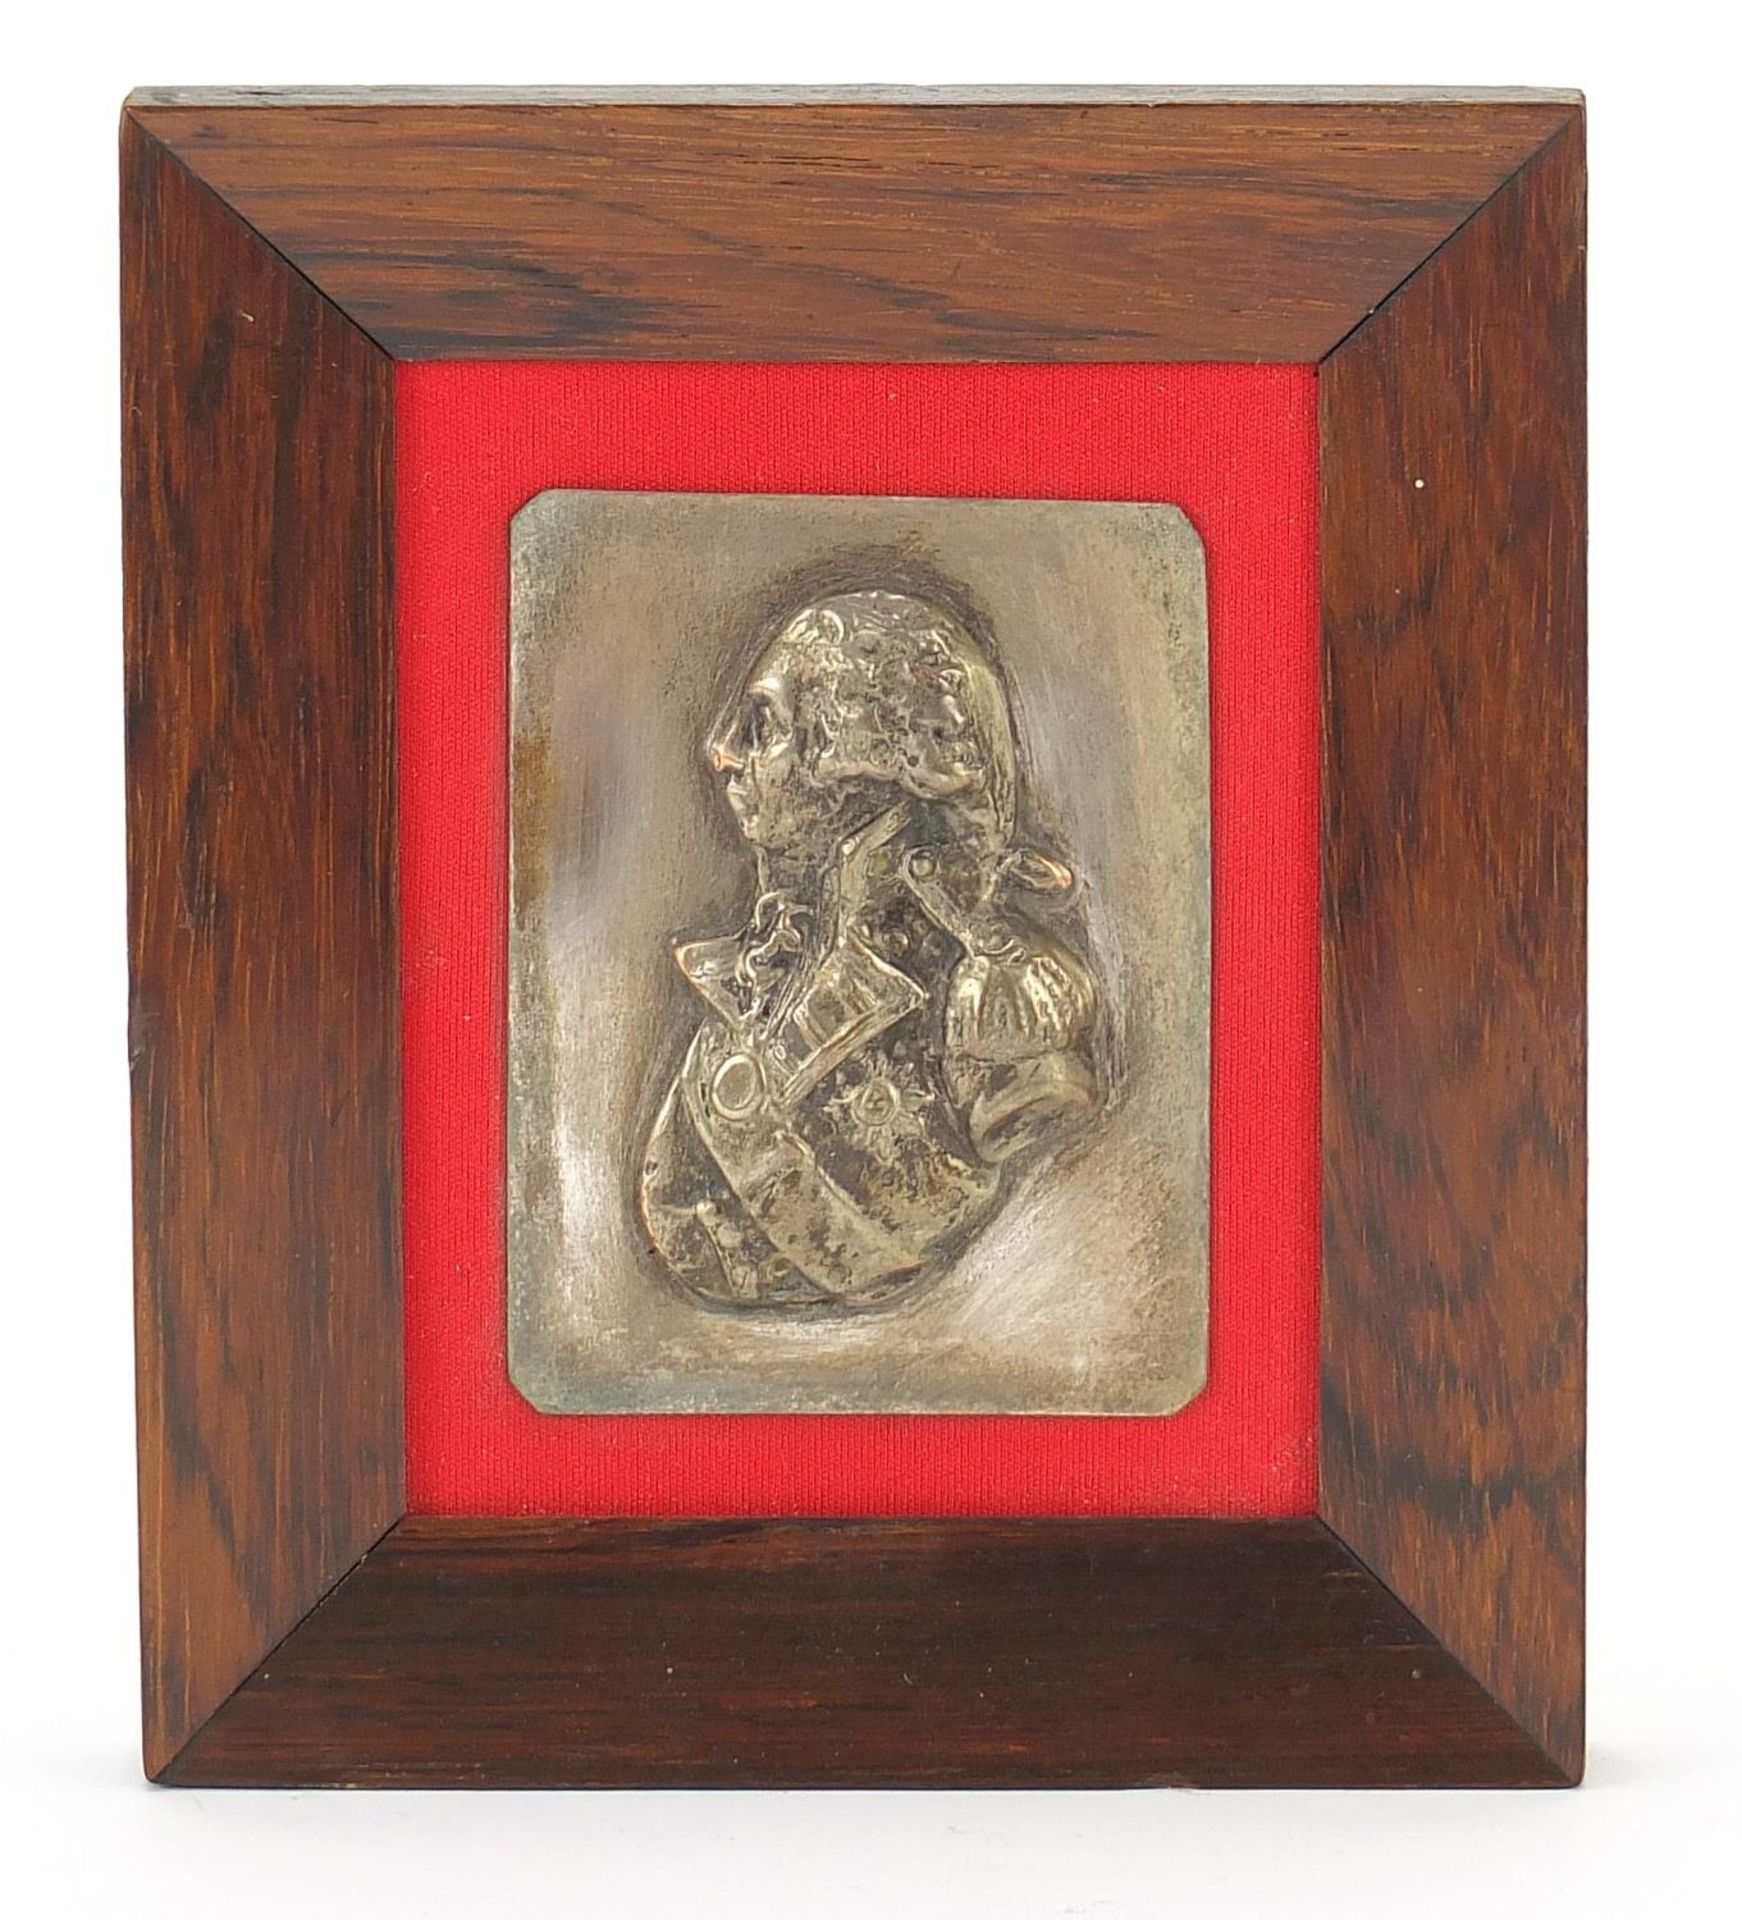 Naval interest silvered plaque of Lord Nelson housed in a rosewood frame, overall 17.5cm x 15cm :